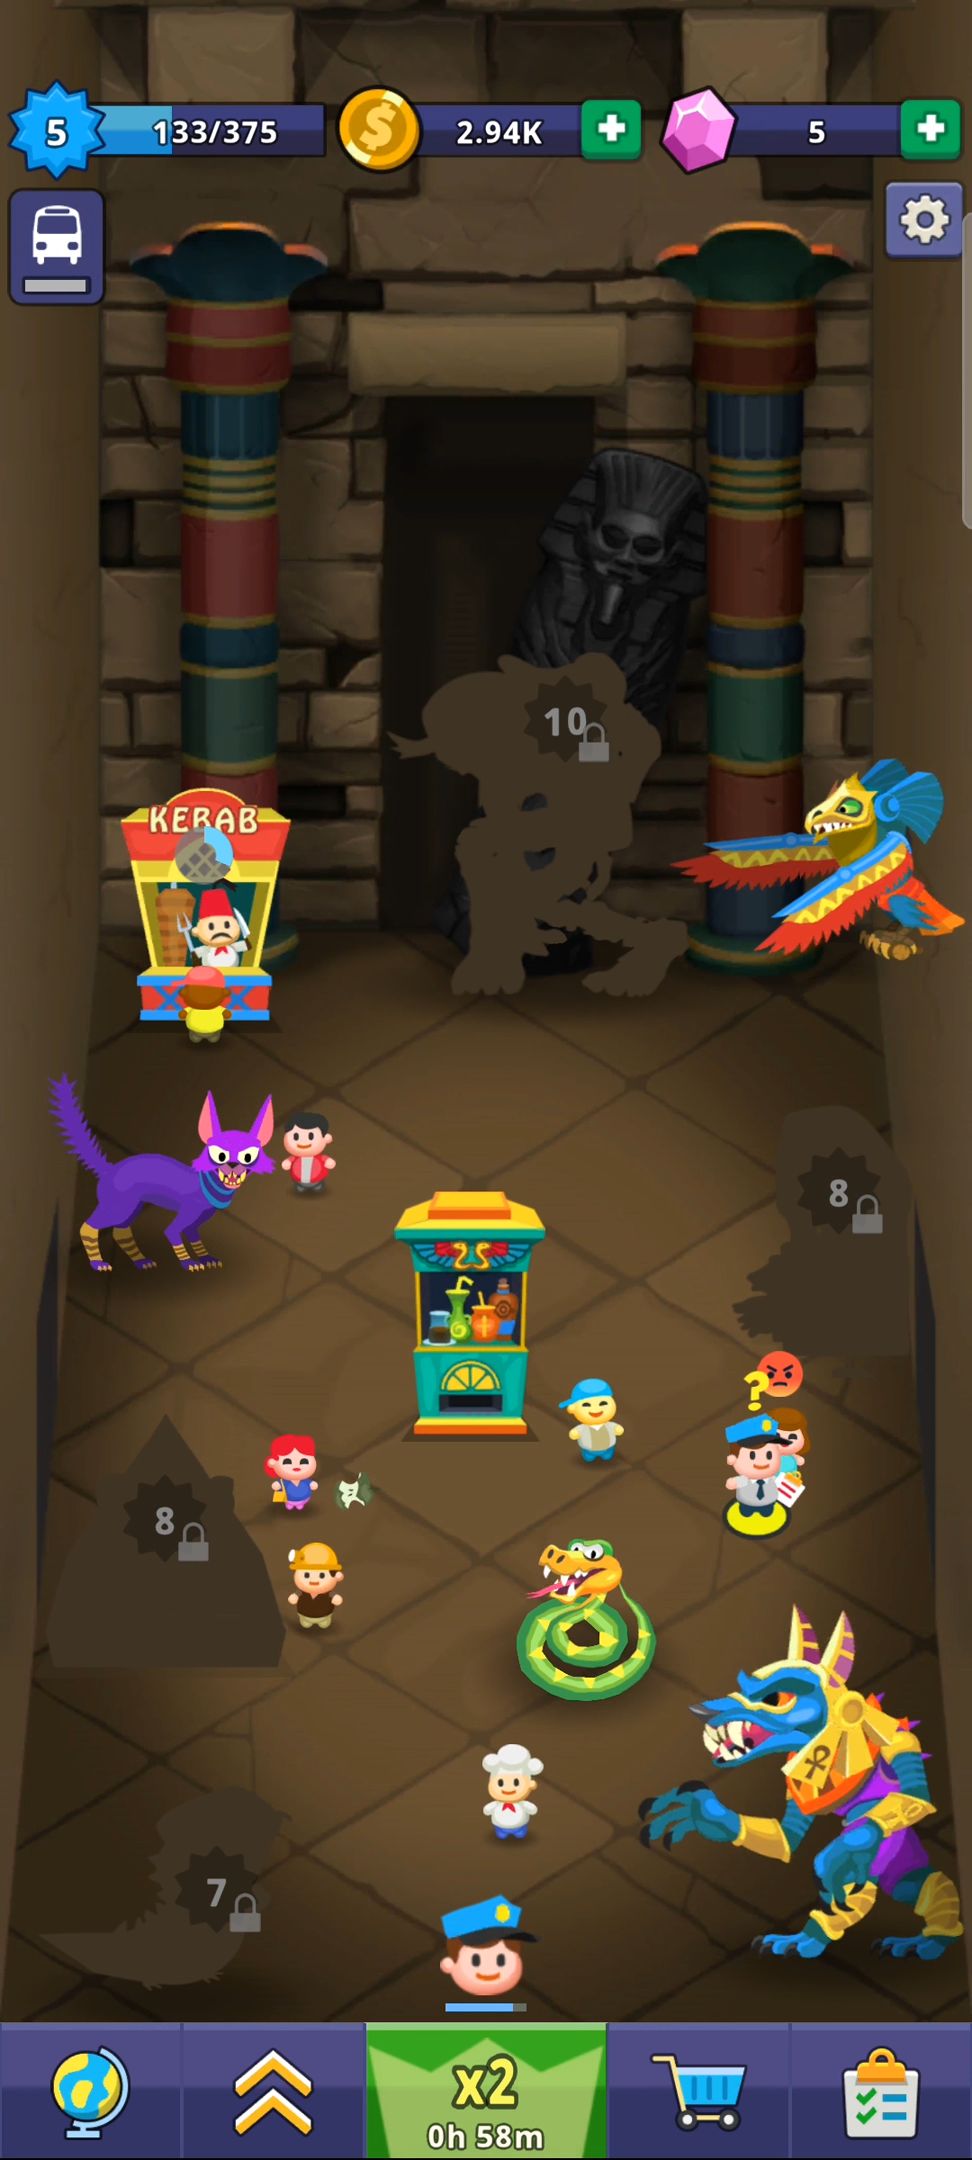 Gameplay of the Idle Creepy Park Inc. for Android phone or tablet.